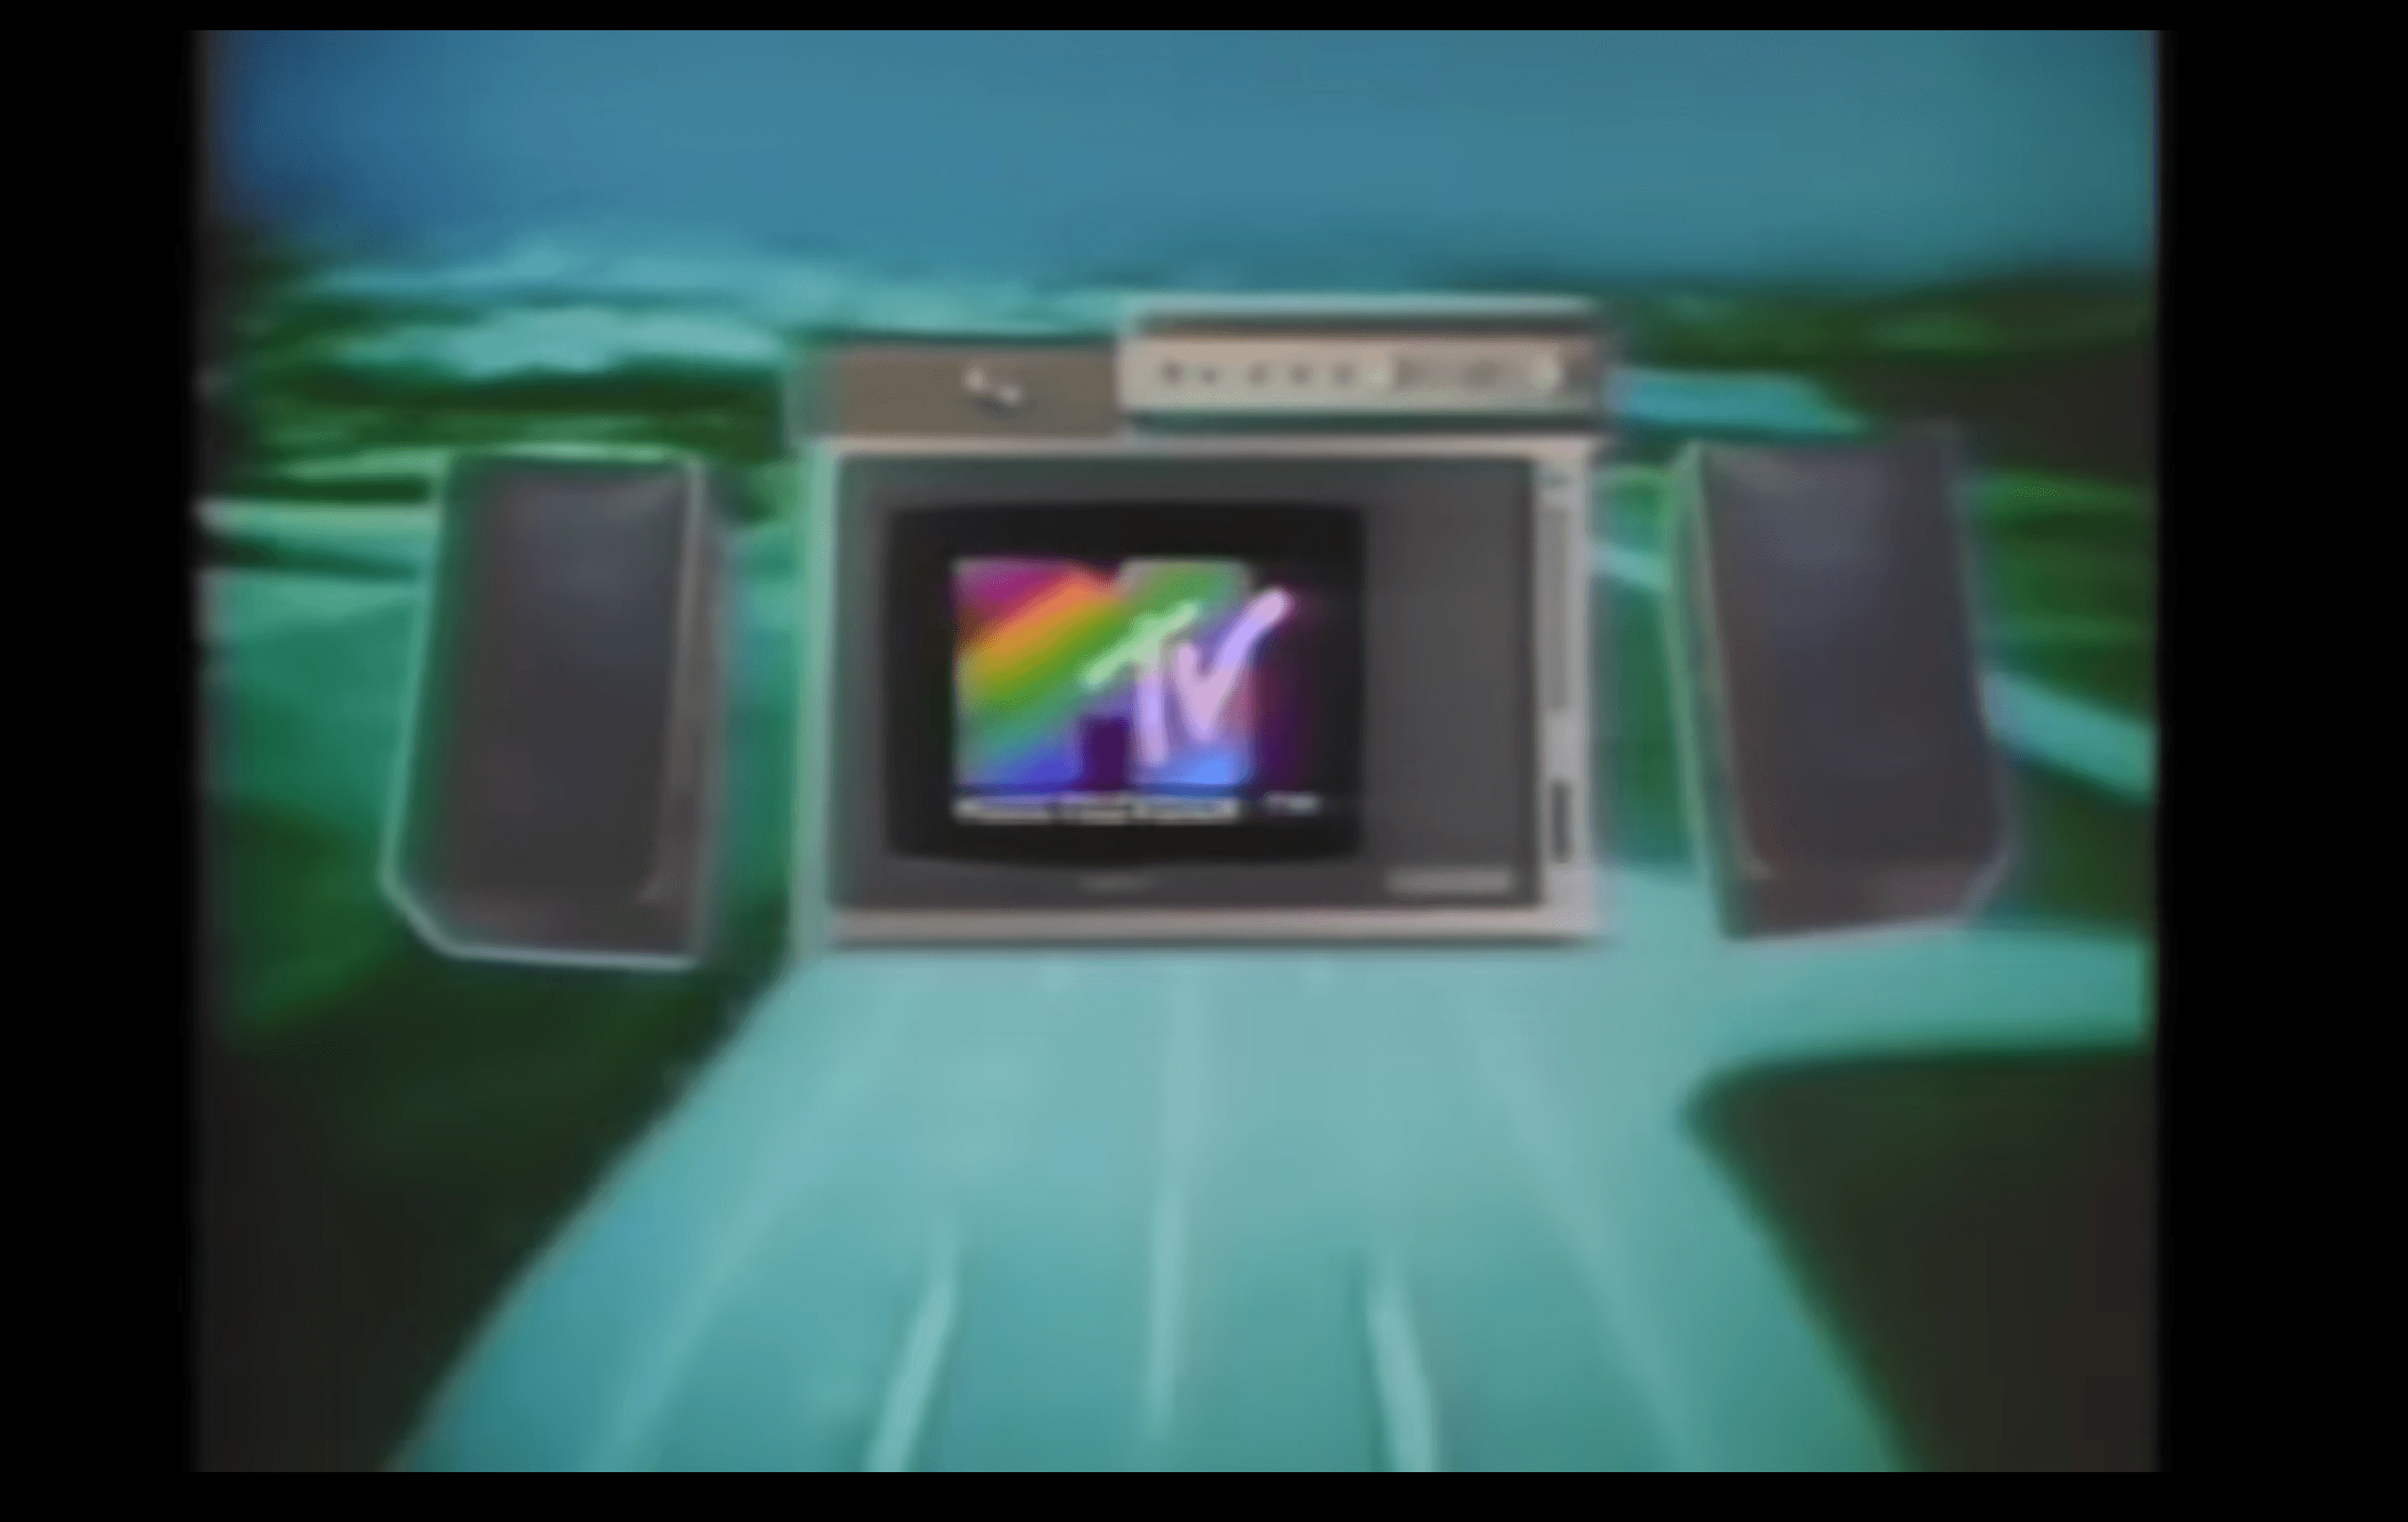 Still from The First hour of MTV, MTV, 1 August 1981. Source: YouTube. 